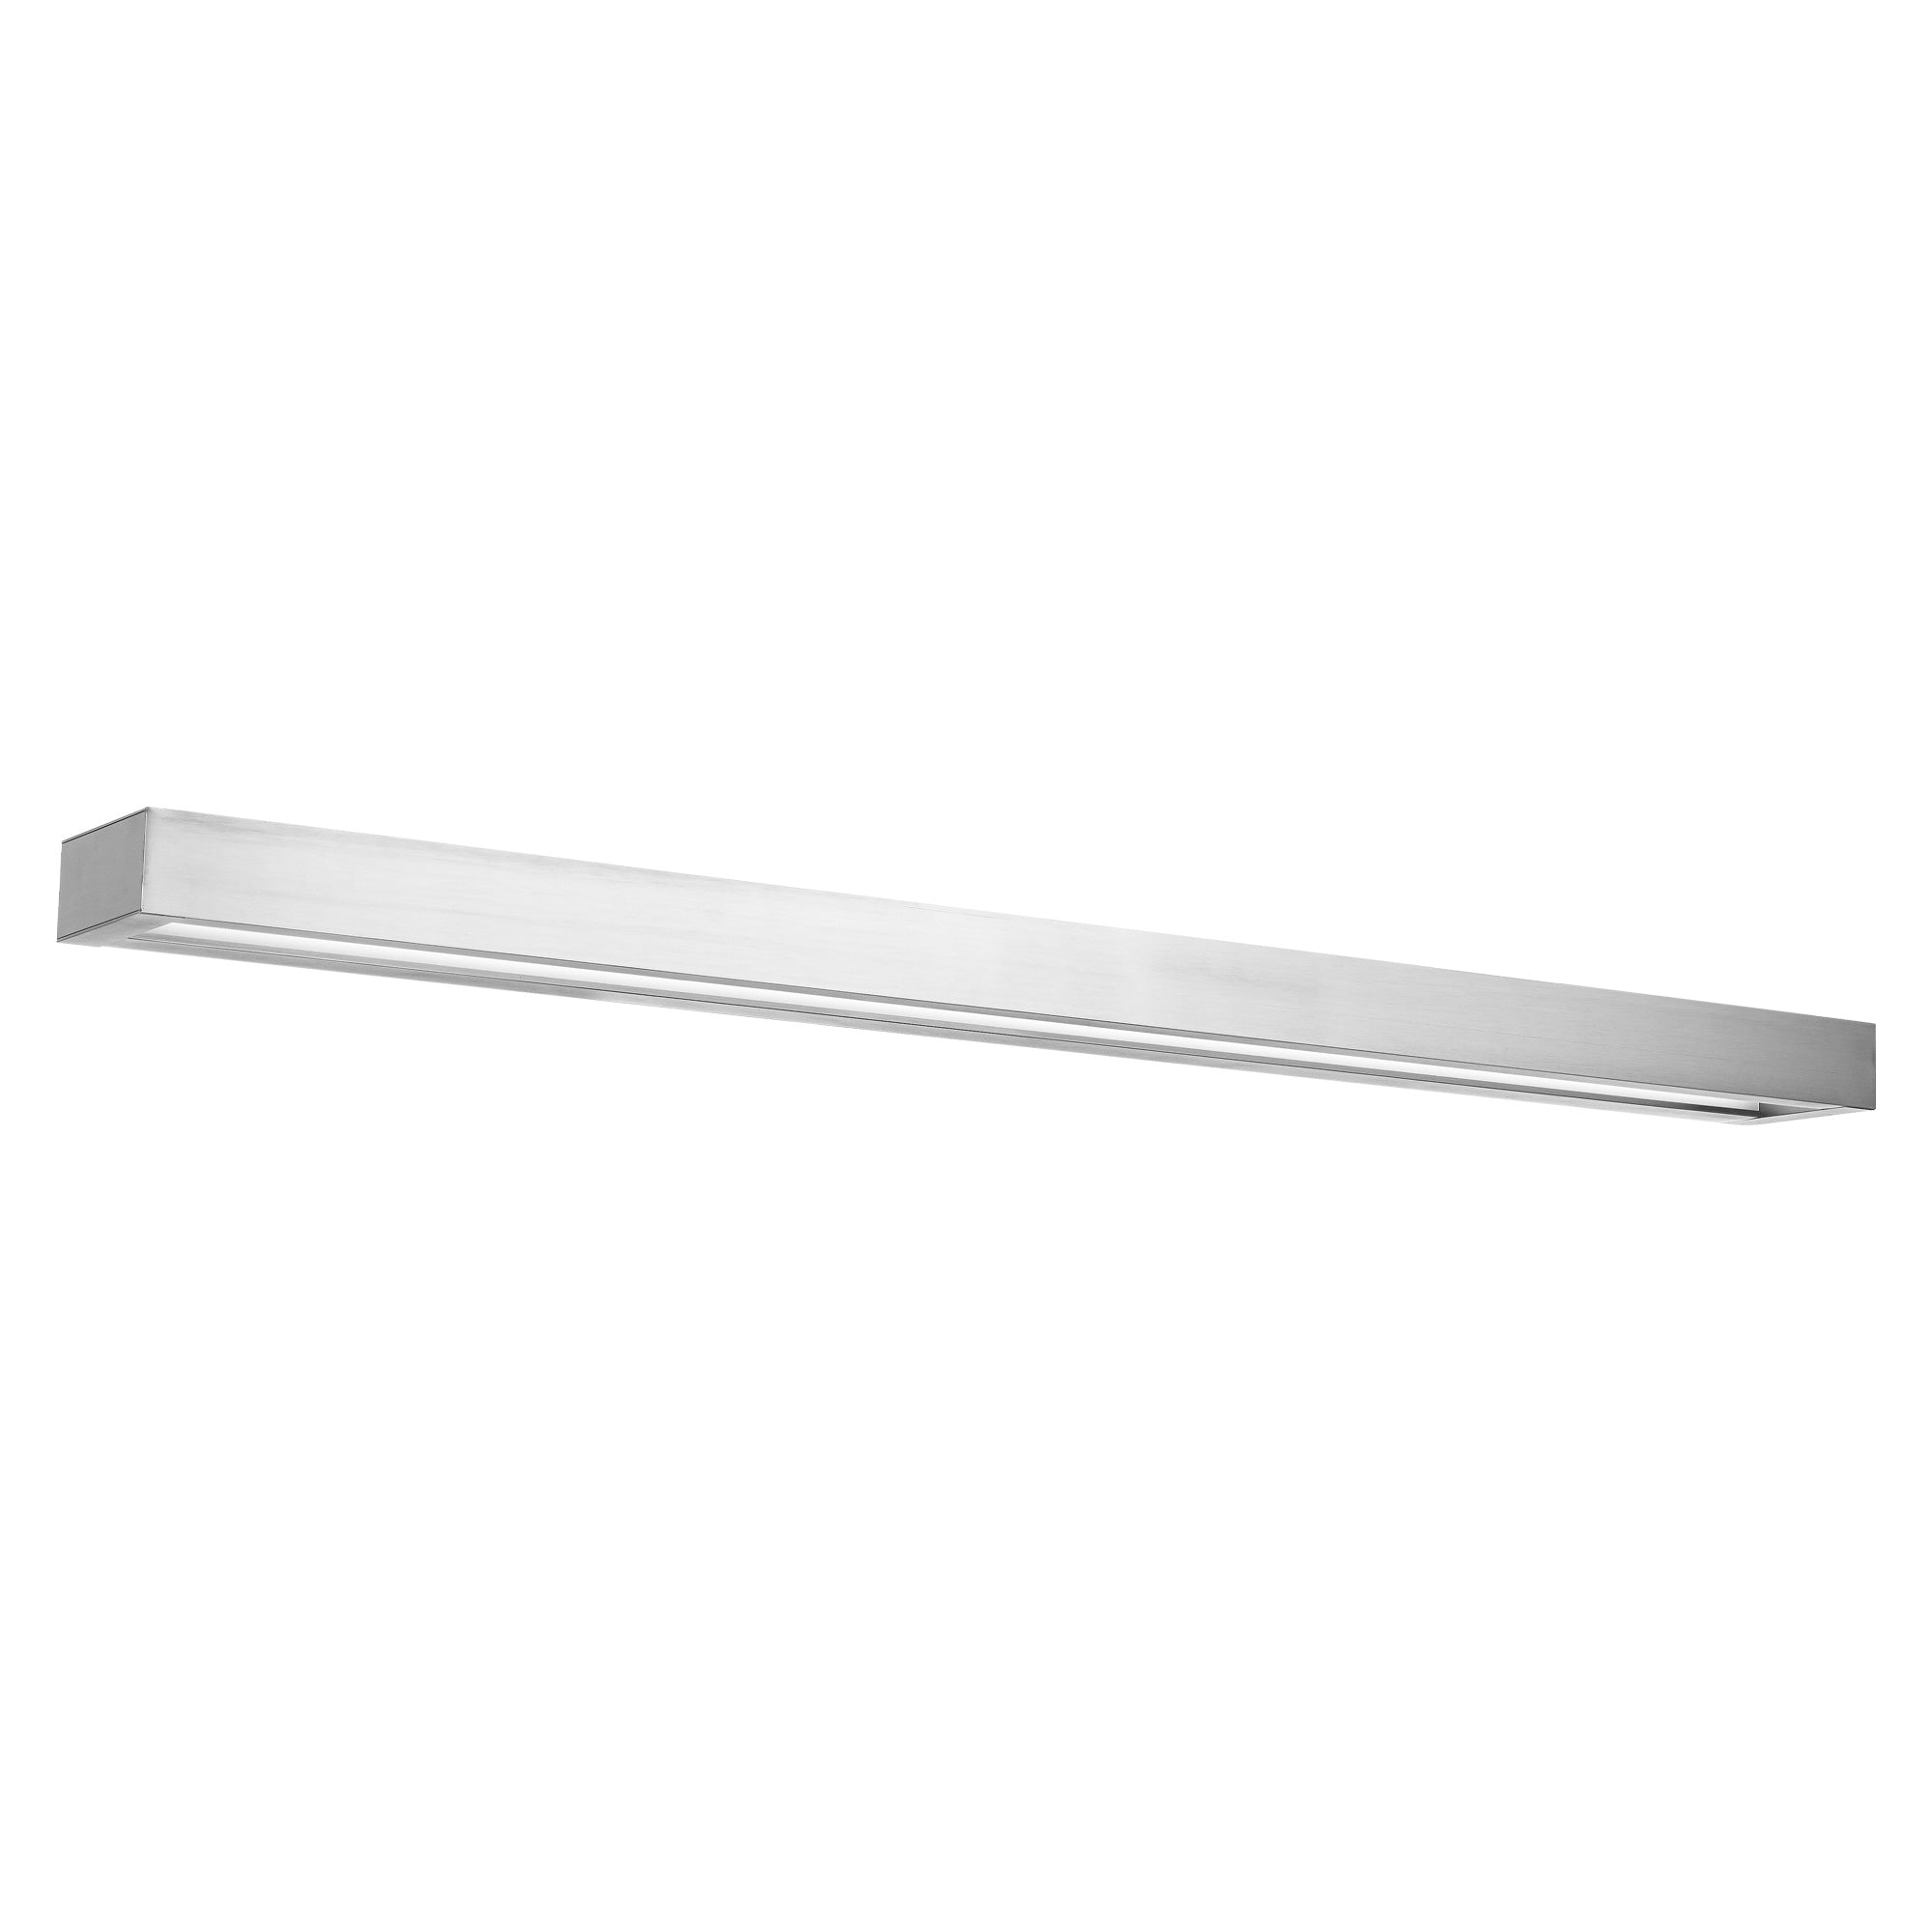 OPEN BAR Bathroom sconce Nickel INTEGRATED LED - WS-52137-35-BN | MODERN FORMS